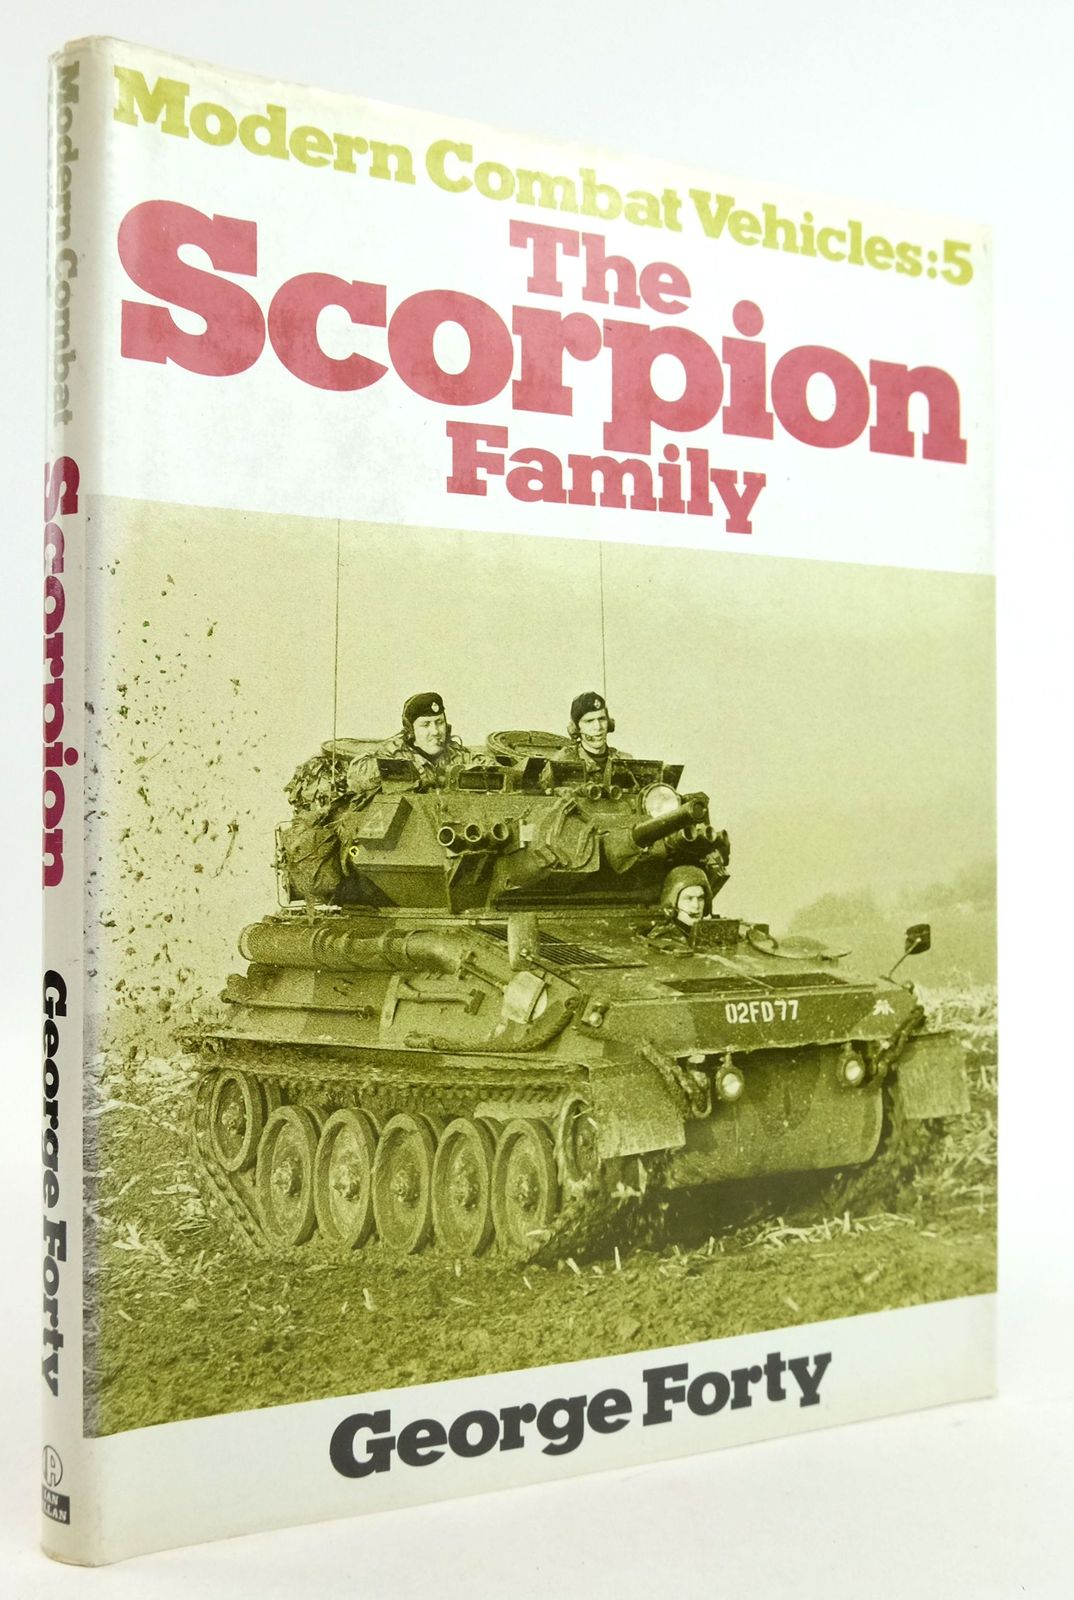 Photo of THE SCORPION FAMILY (MODERN COMBAT VEHICLES: 5) written by Forty, George published by Ian Allan Ltd. (STOCK CODE: 1819672)  for sale by Stella & Rose's Books